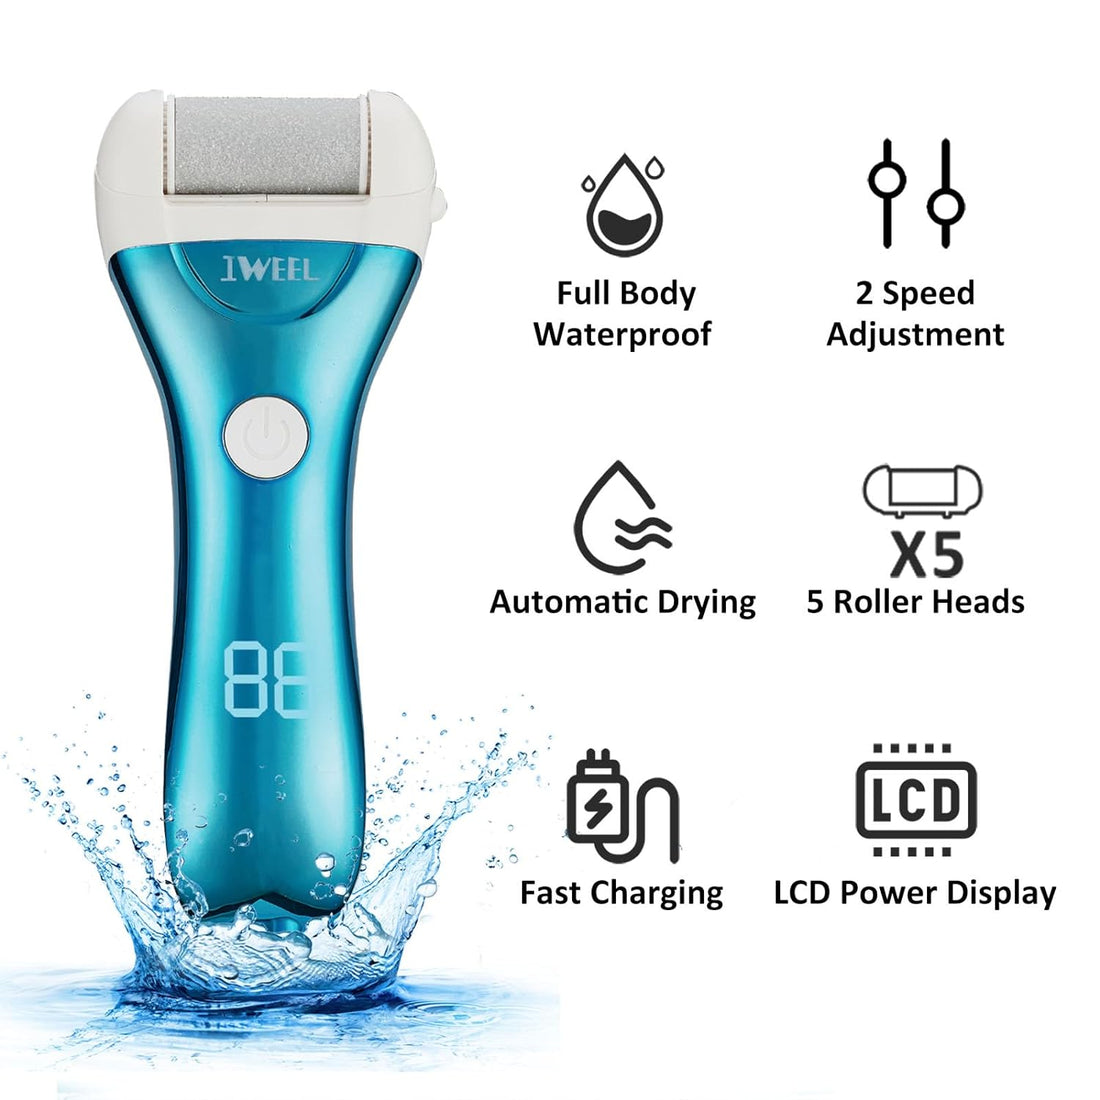 Callus Remover for Feet, Electric Foot File Rechargeable Foot Scrubber Pedicure Tools for Feet Electronic Callus Shaver Waterproof Pedicure kit for Cracked Heels and Dead Skin with 5 Roller Heads